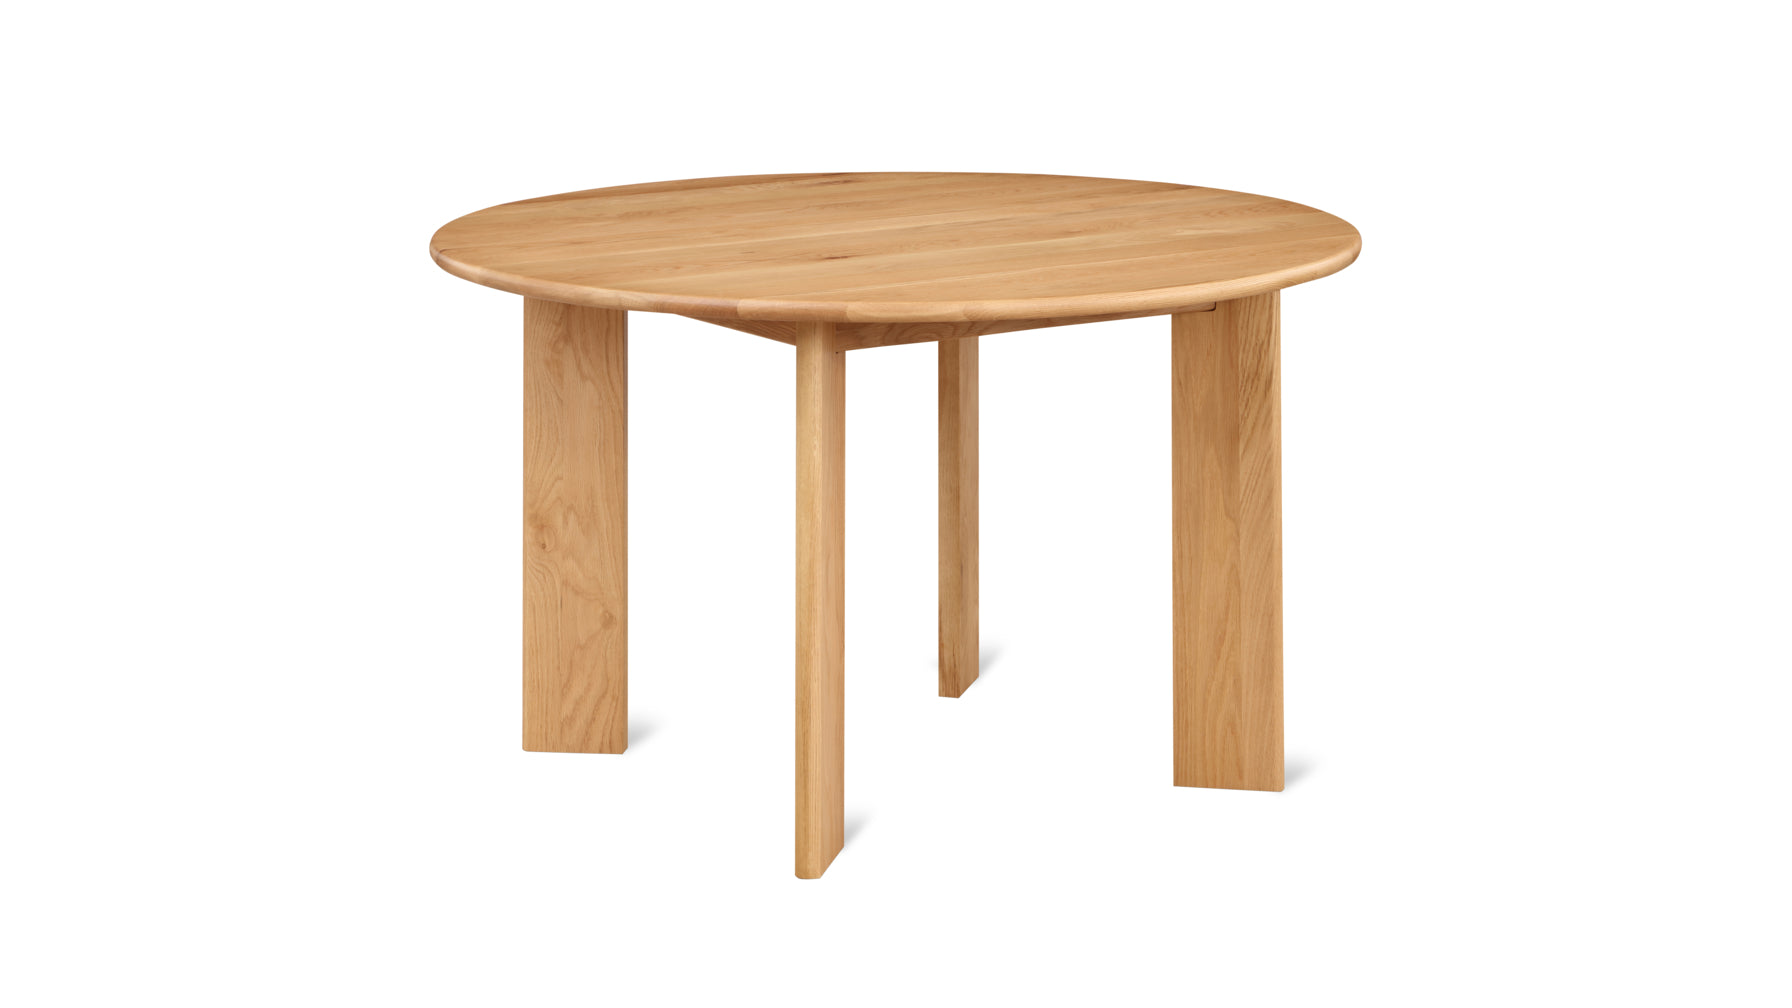 Frame Round Dining Table, Seats 4-5 People, Oak - Image 1